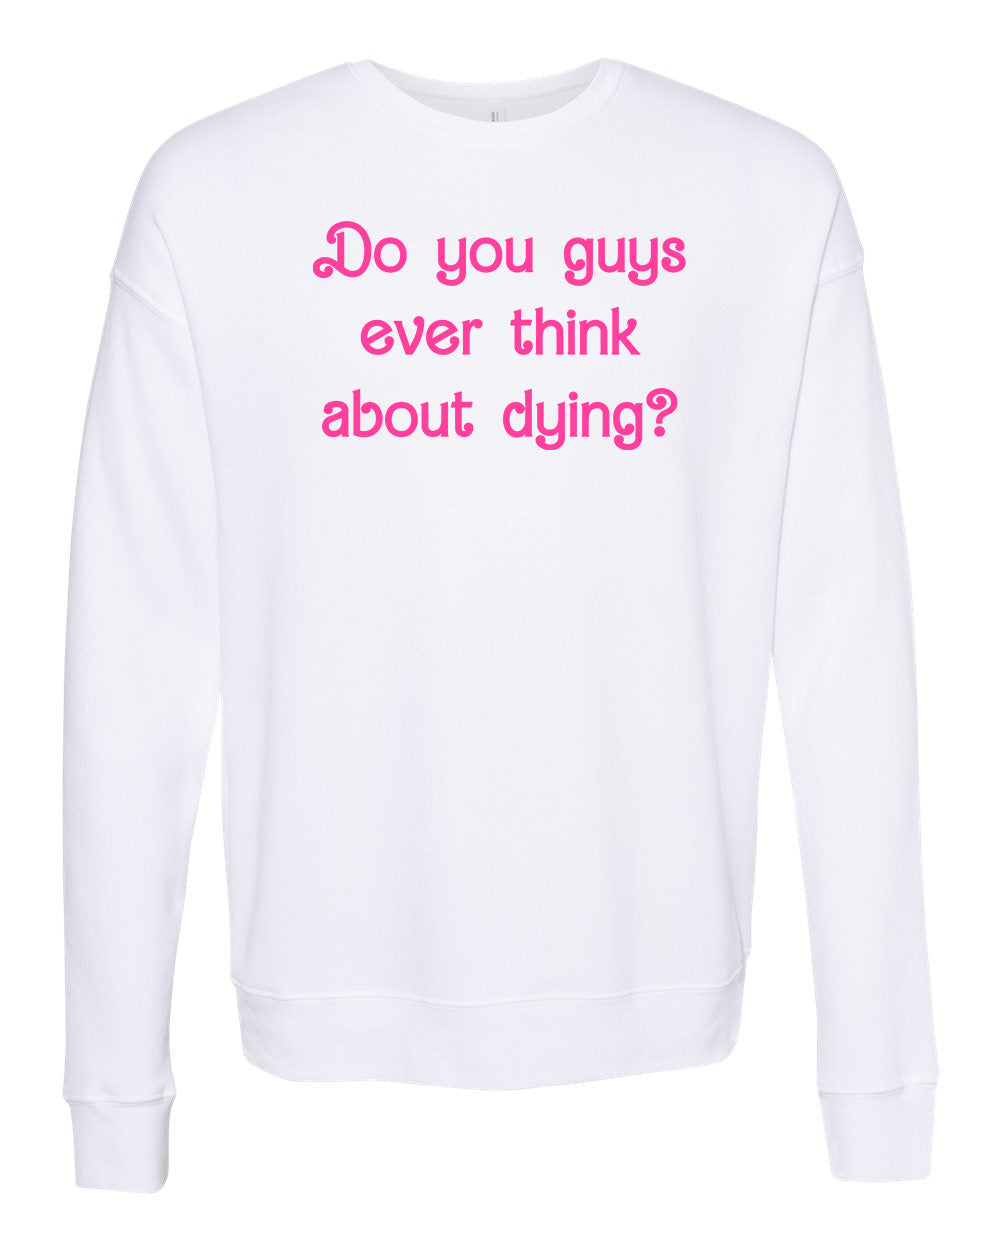 Do You Guys Ever Think About Dying? - Unisex Sweatshirt - White with Pink Ink